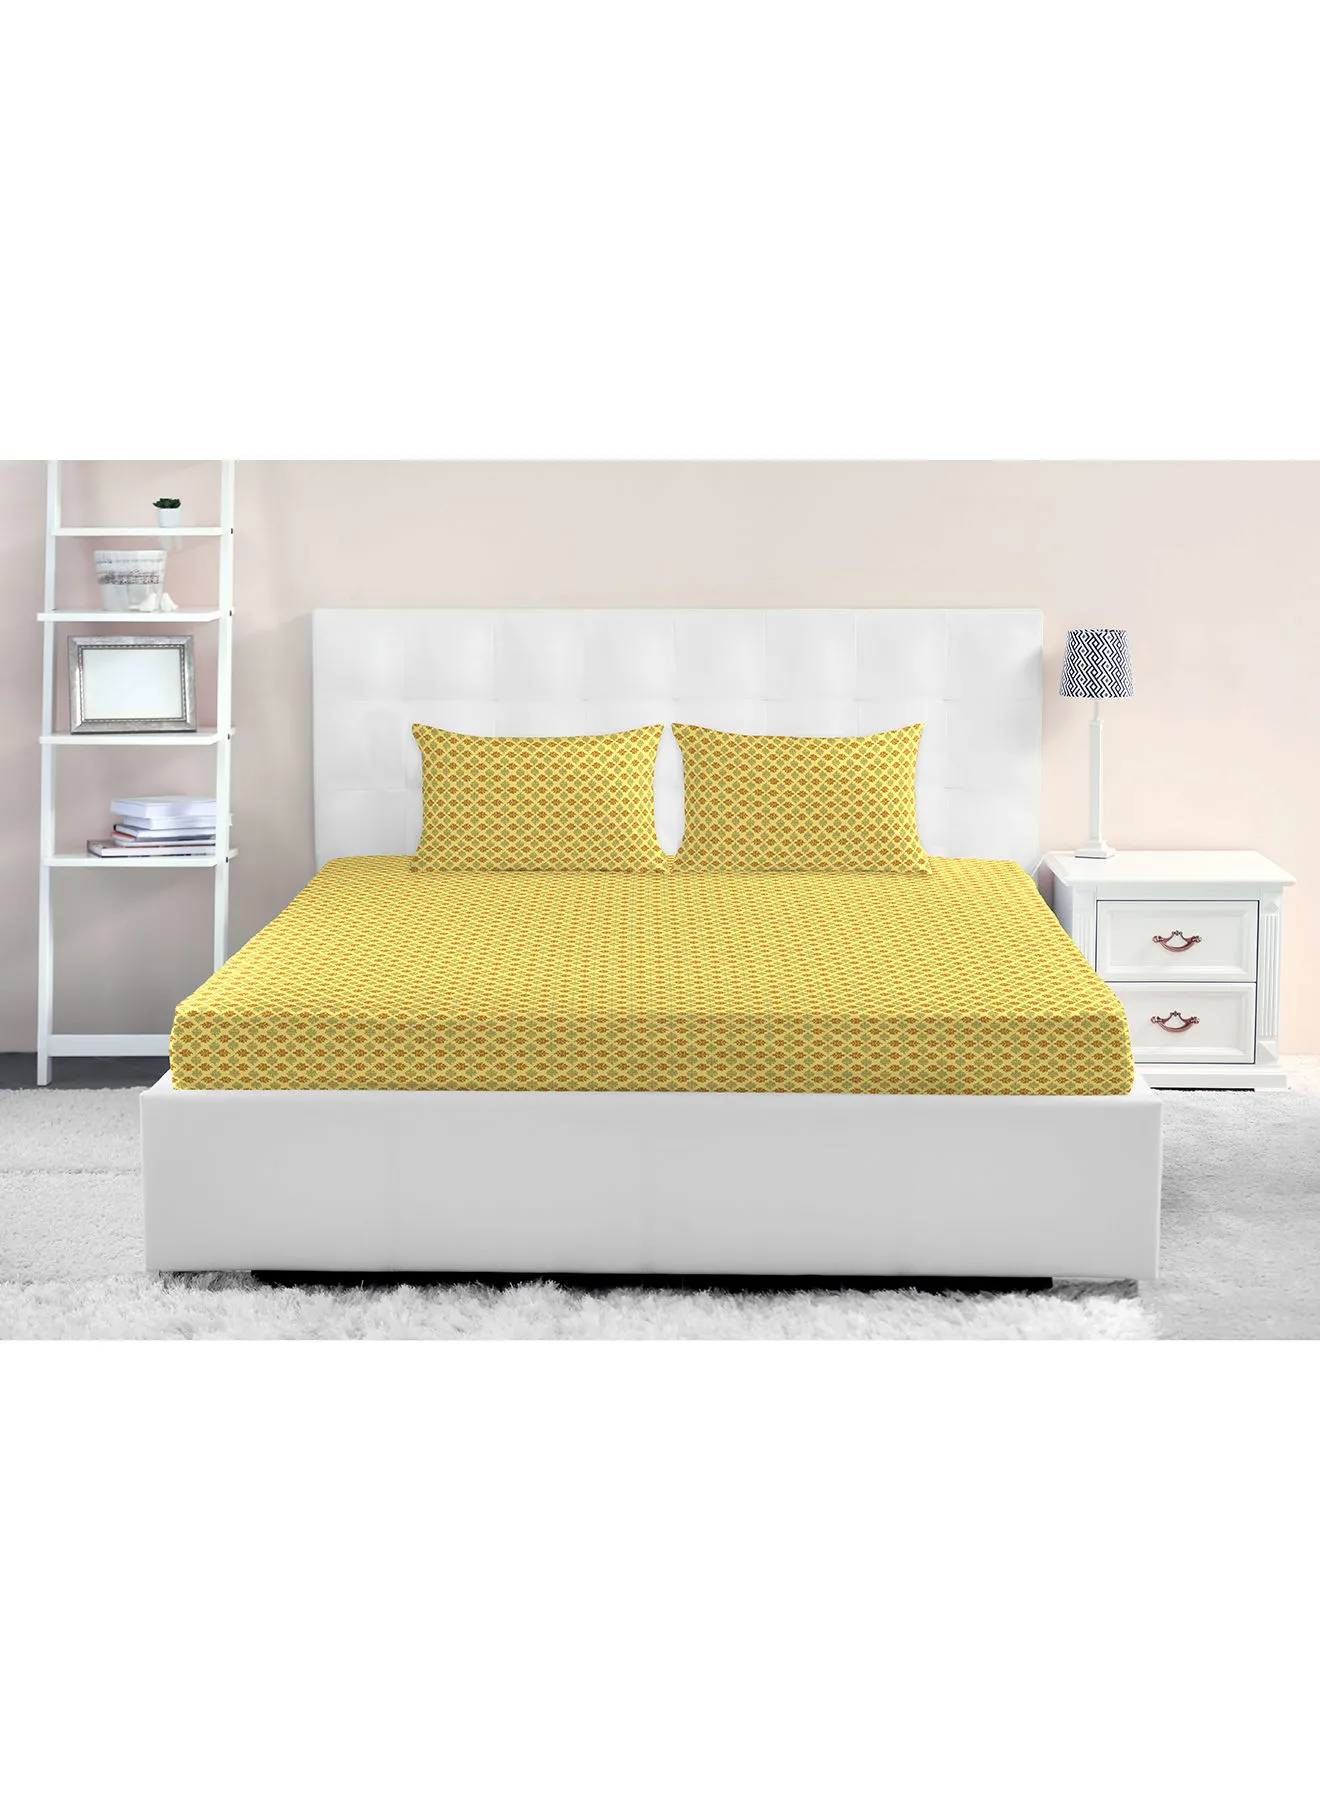 Amal Fitted Bedsheet Set King Size High Quality 100% Cotton Percale 144 TC Light Weight Everyday Use 1 Bed Sheet And 2 Pillow Cases Printed Yellow